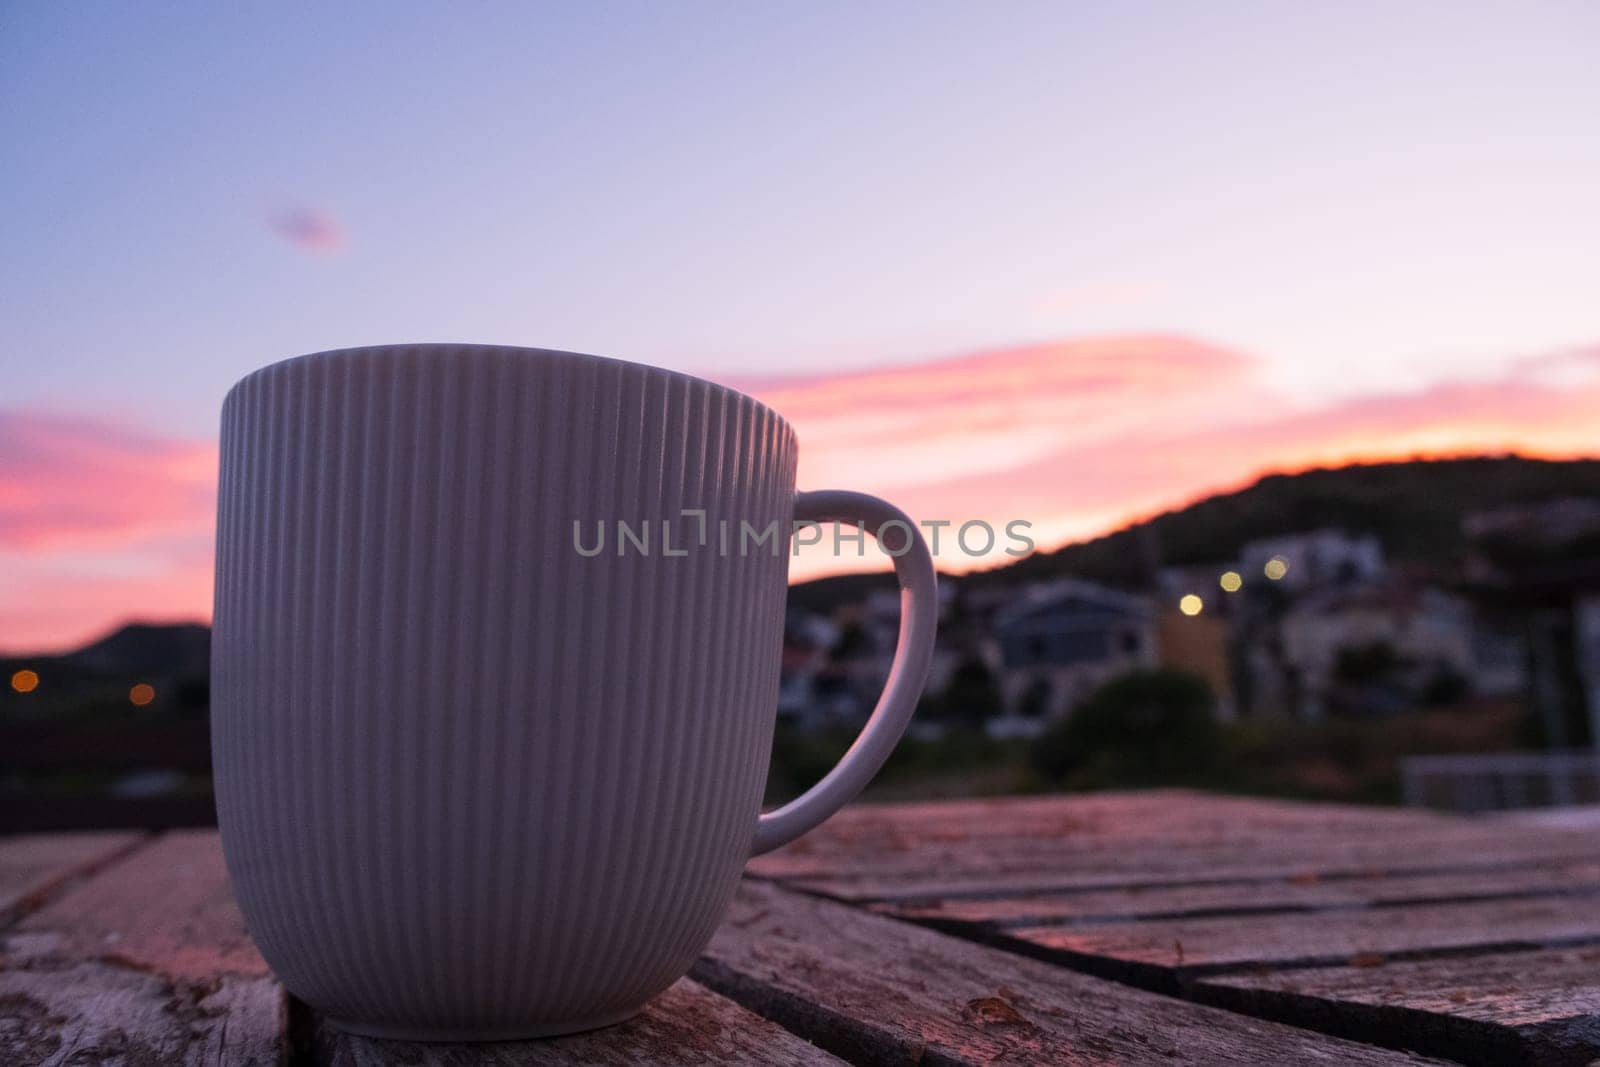 Coffee cup on table against sunset sky in wooden landscape by senkaya